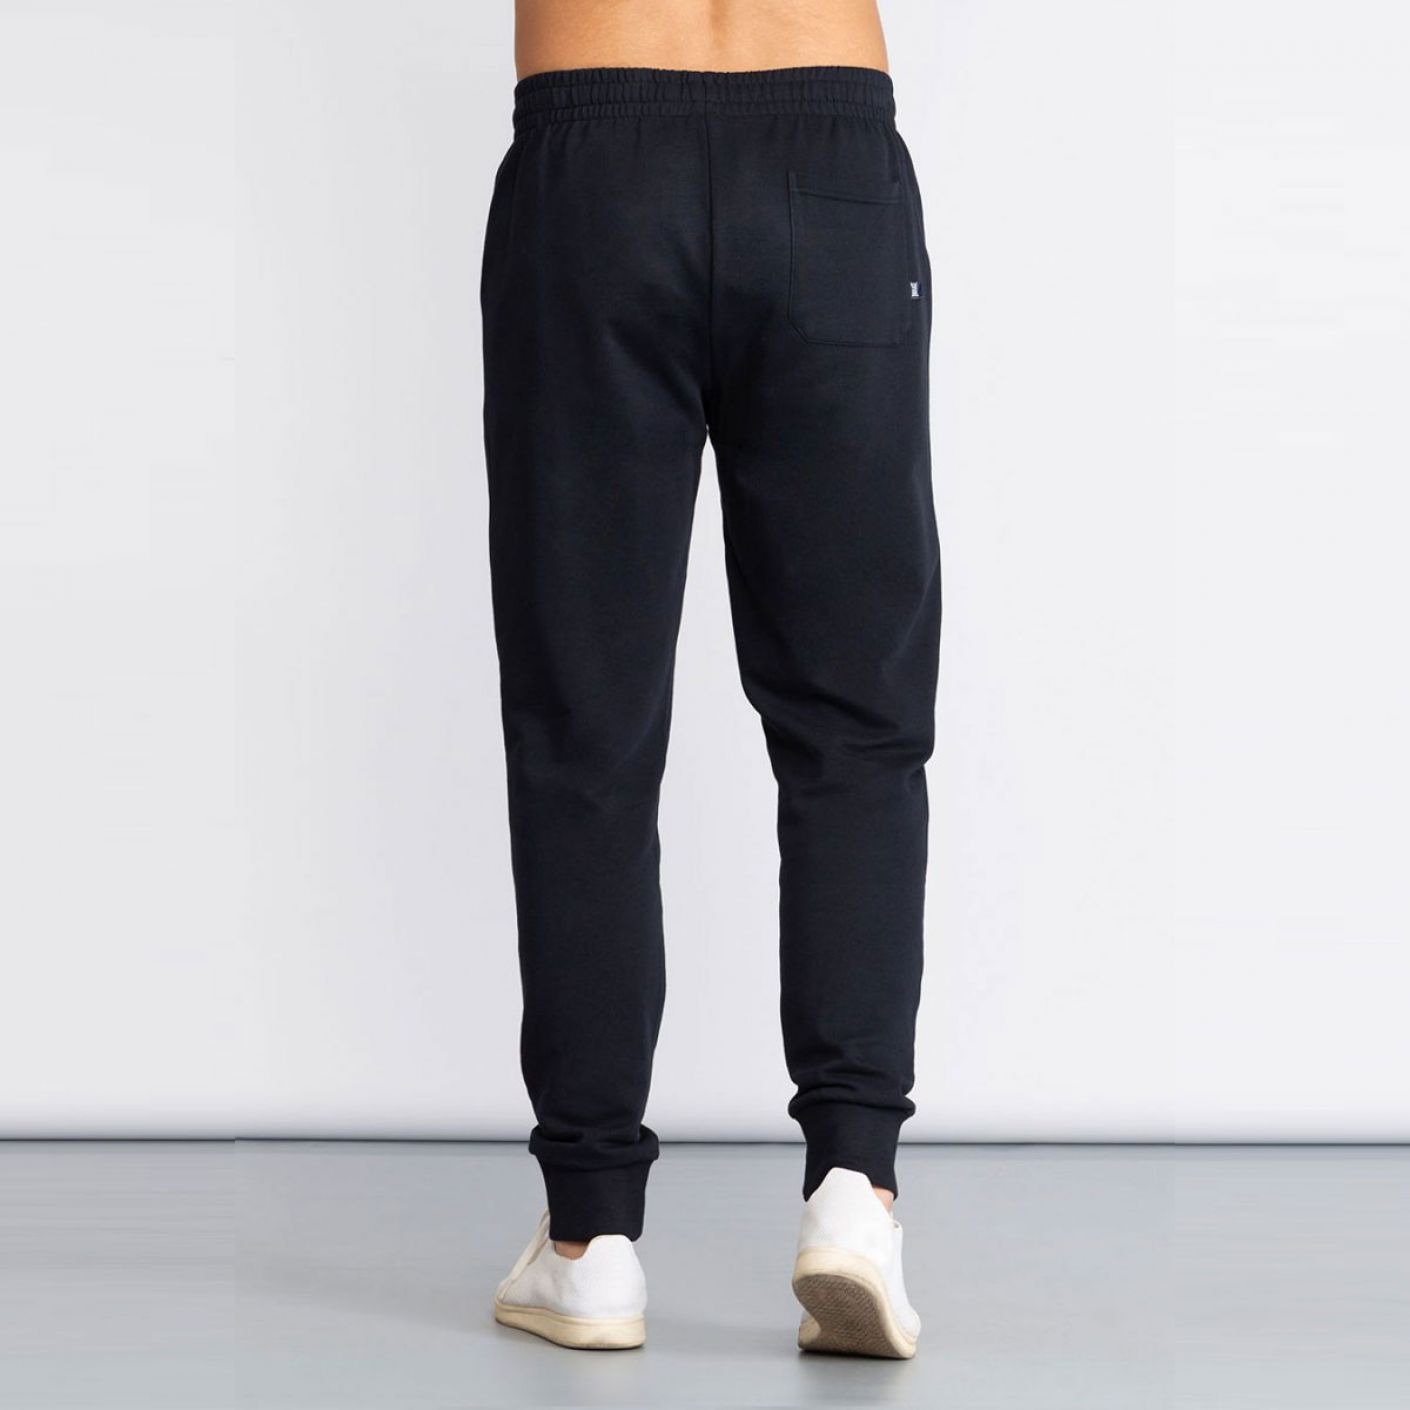 Everlast Basic Cotton Pants with Navy Blue Cuff